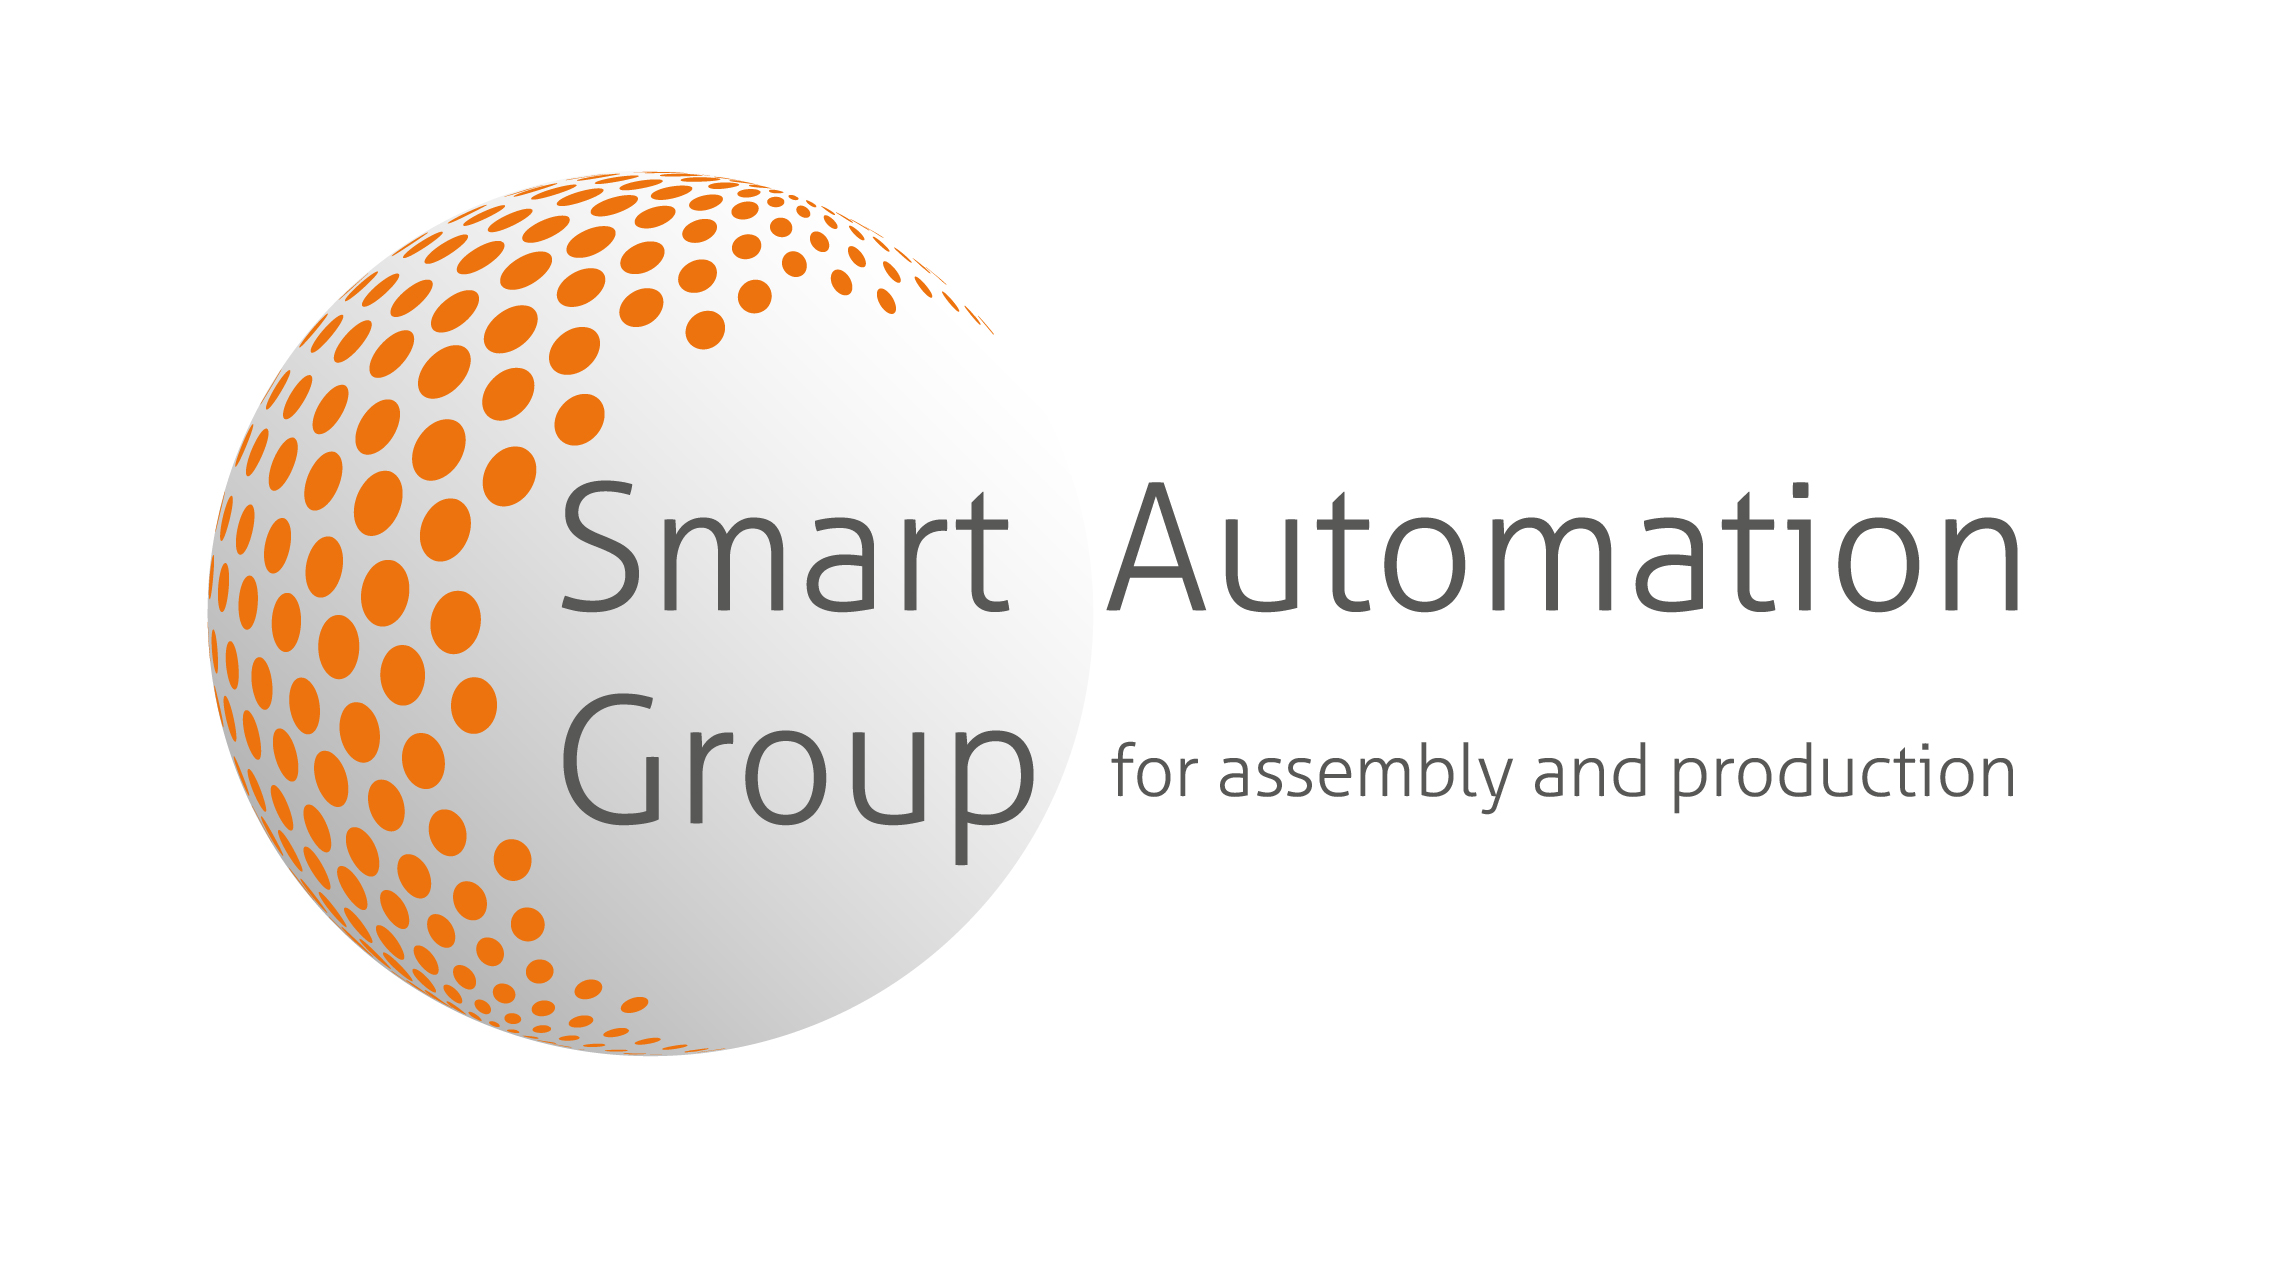 bfa belongs to the Smart Automation Group